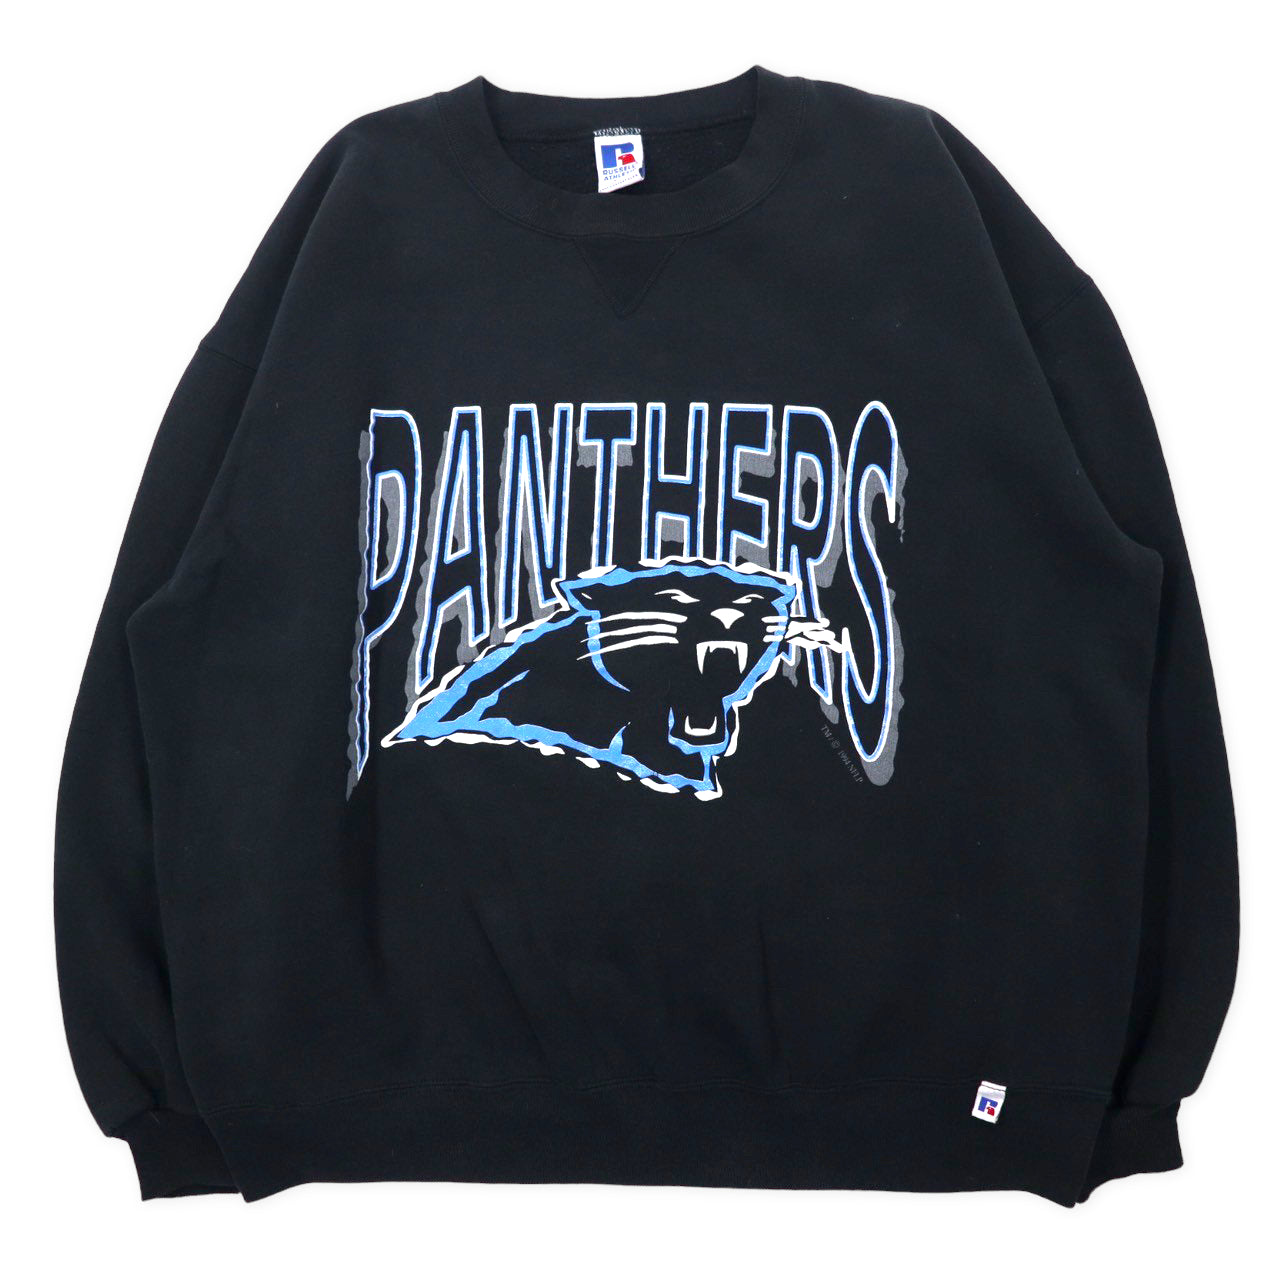 Russell Athletic USA MADE 90s NFL PANTHERS Print Sweatshirt XXL Black  Cotton Pan Size Big Size